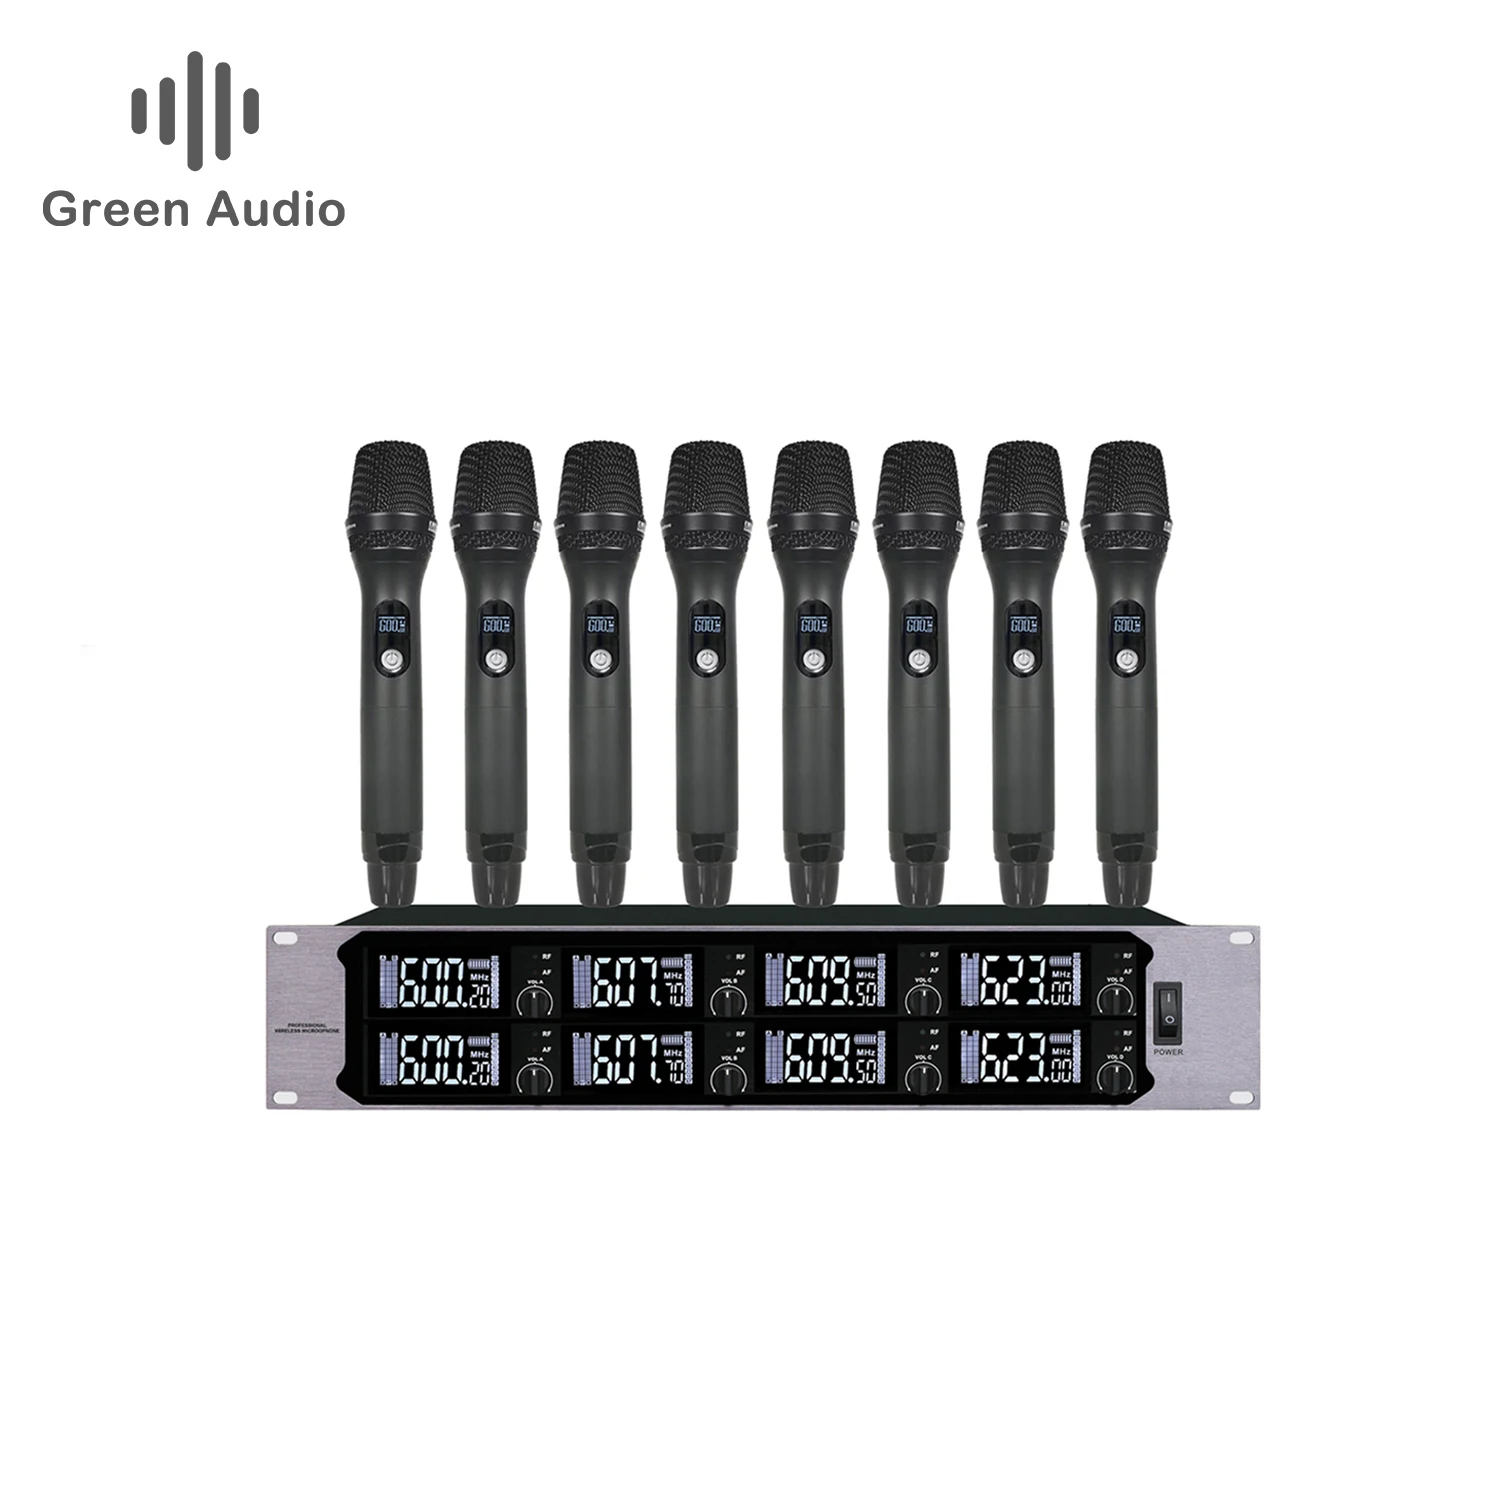 

GAW-H8804 One drag eight wireless metal microphone professional conference room stage performance UHF handheld microphone